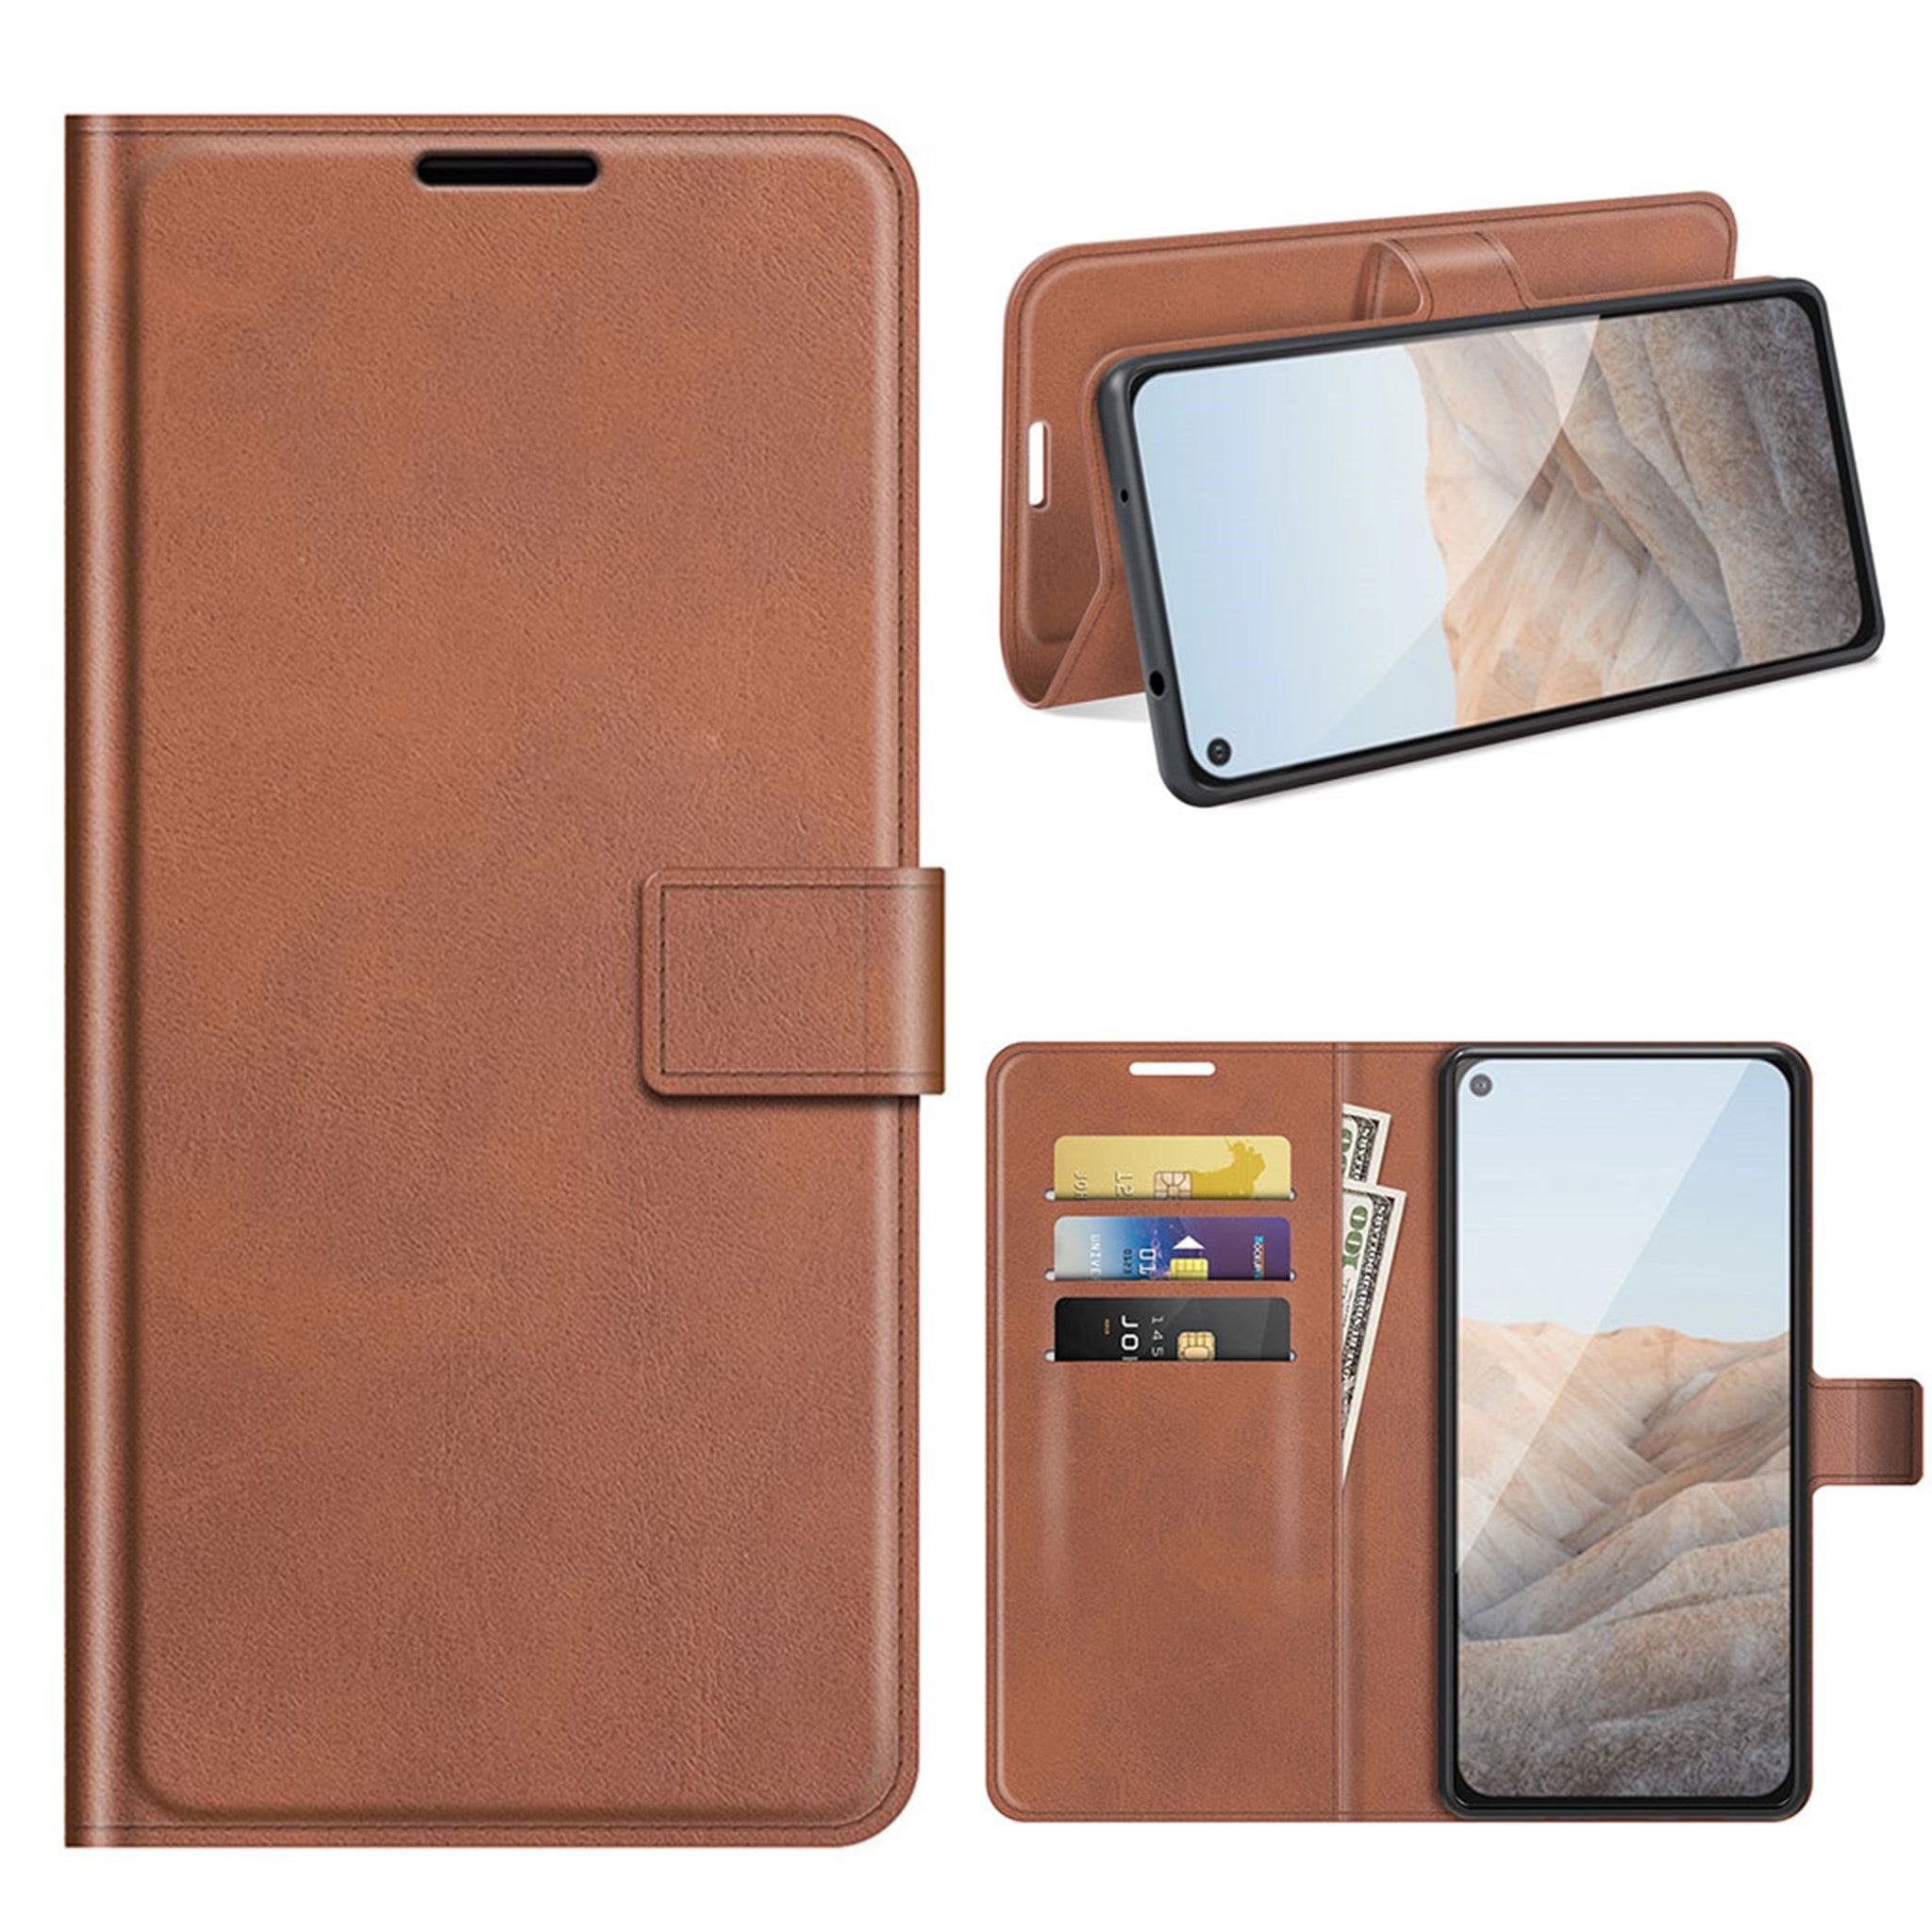 Wallet-style leather case for Google Pixel 5a - Light Brown